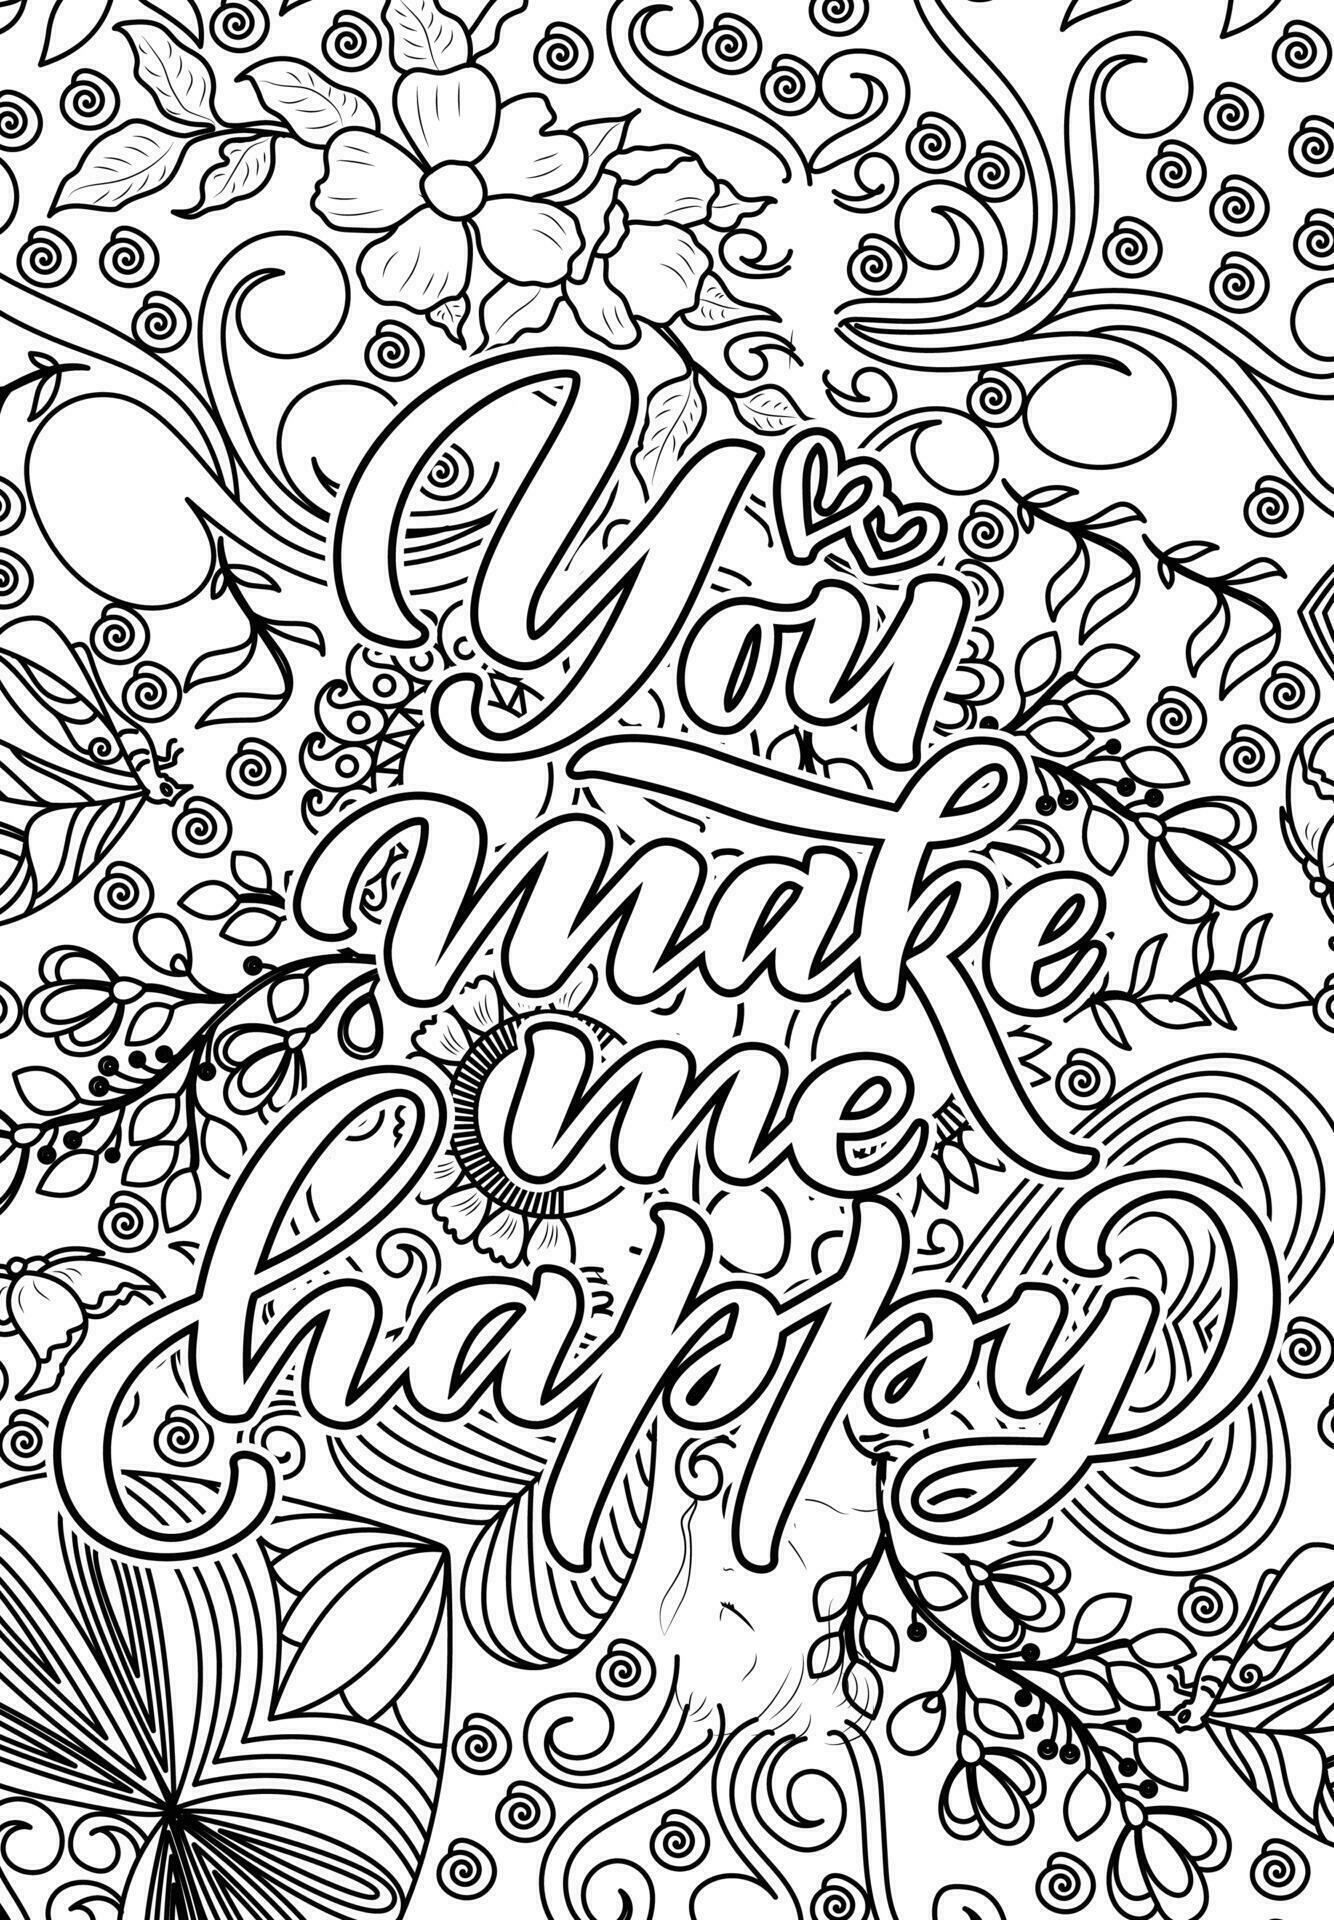 Heart Quotes Design page, Adult Coloring page design, anxiety relief